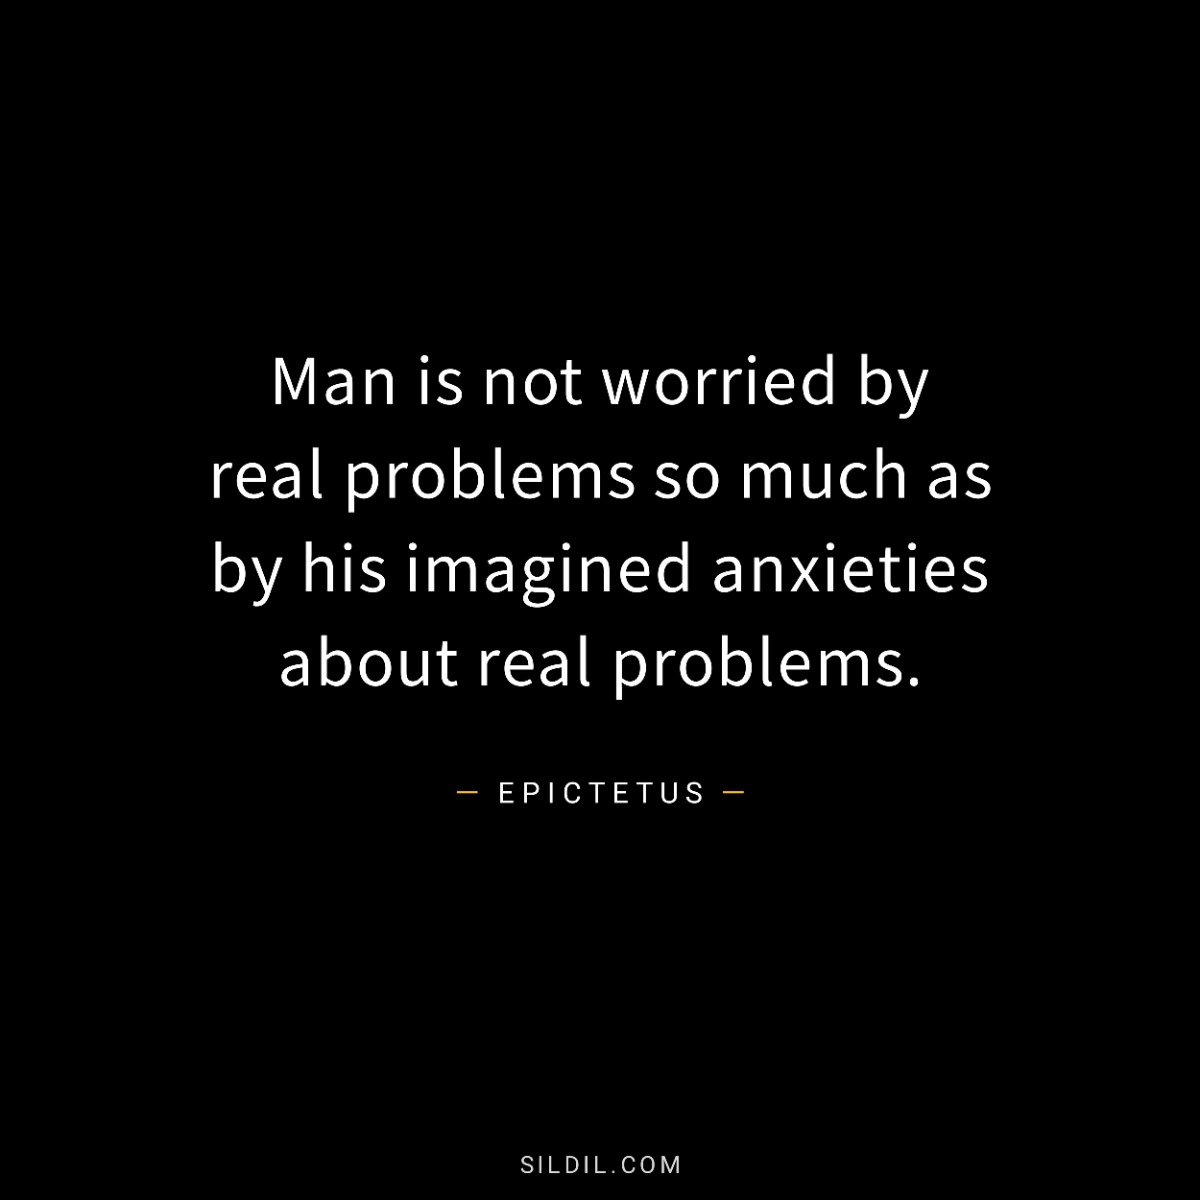 Man is not worried by real problems so much as by his imagined anxieties about real problems.